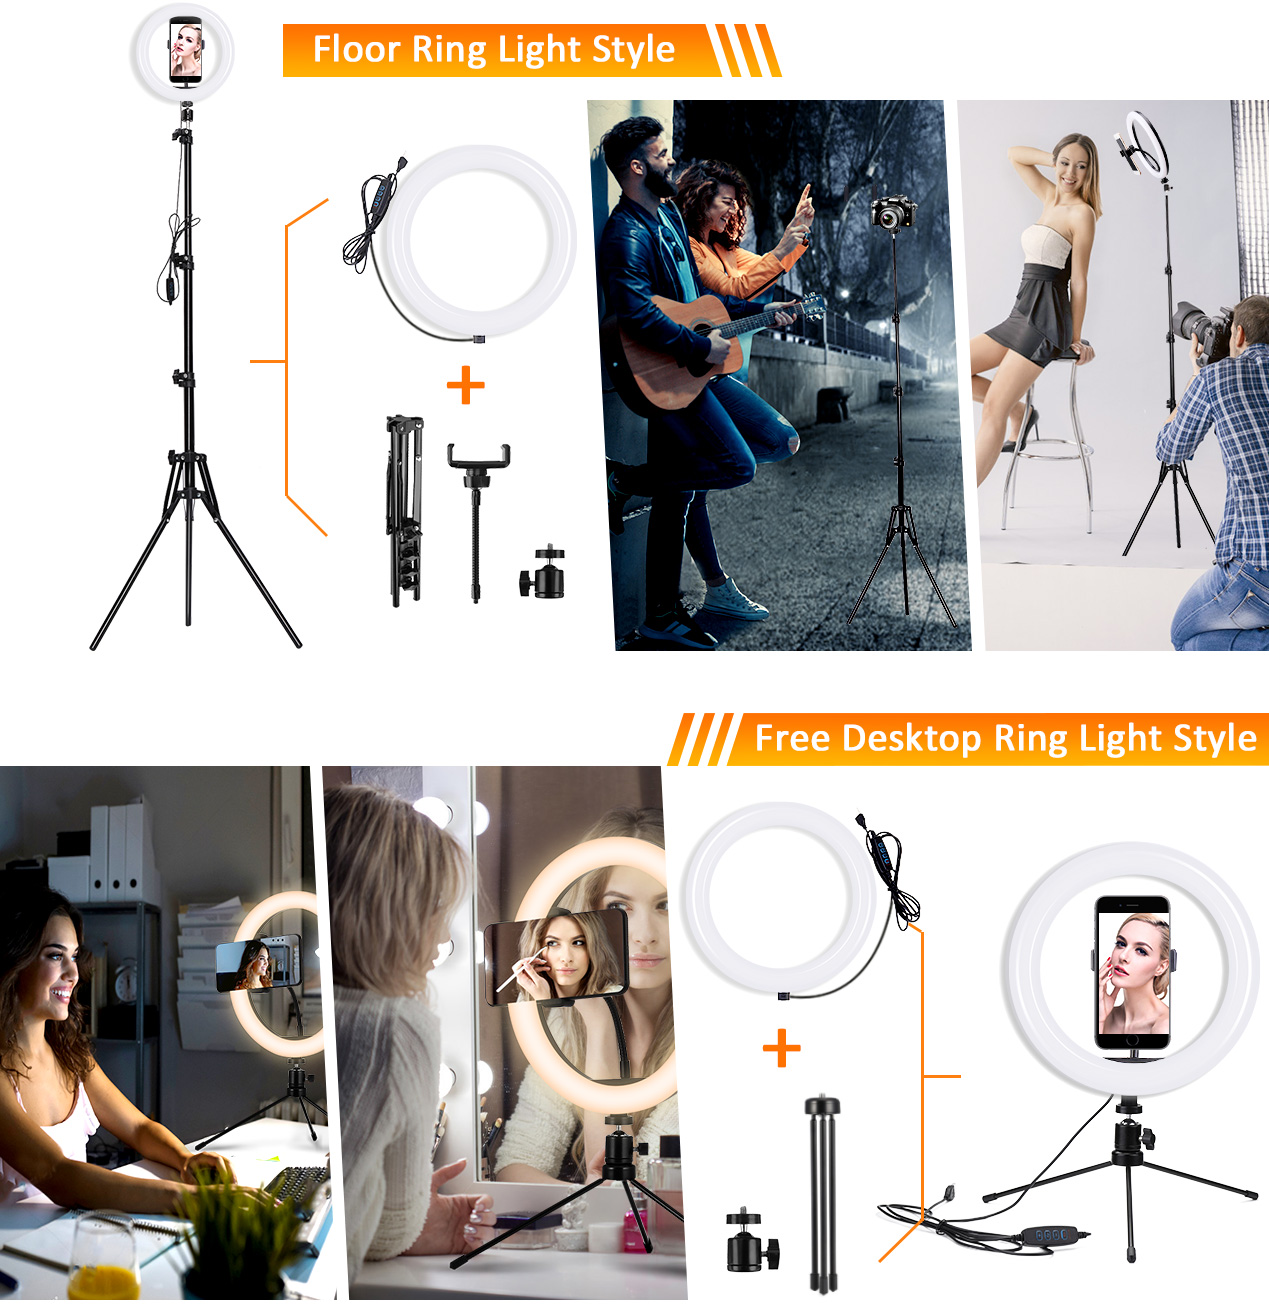 MOHOO-160cm-10-inch-3-Color-Modes-10-Brightness-Levels-USB-Video-Light-Tripod-Stand-for-Tik-Tok-Yout-1667980-7